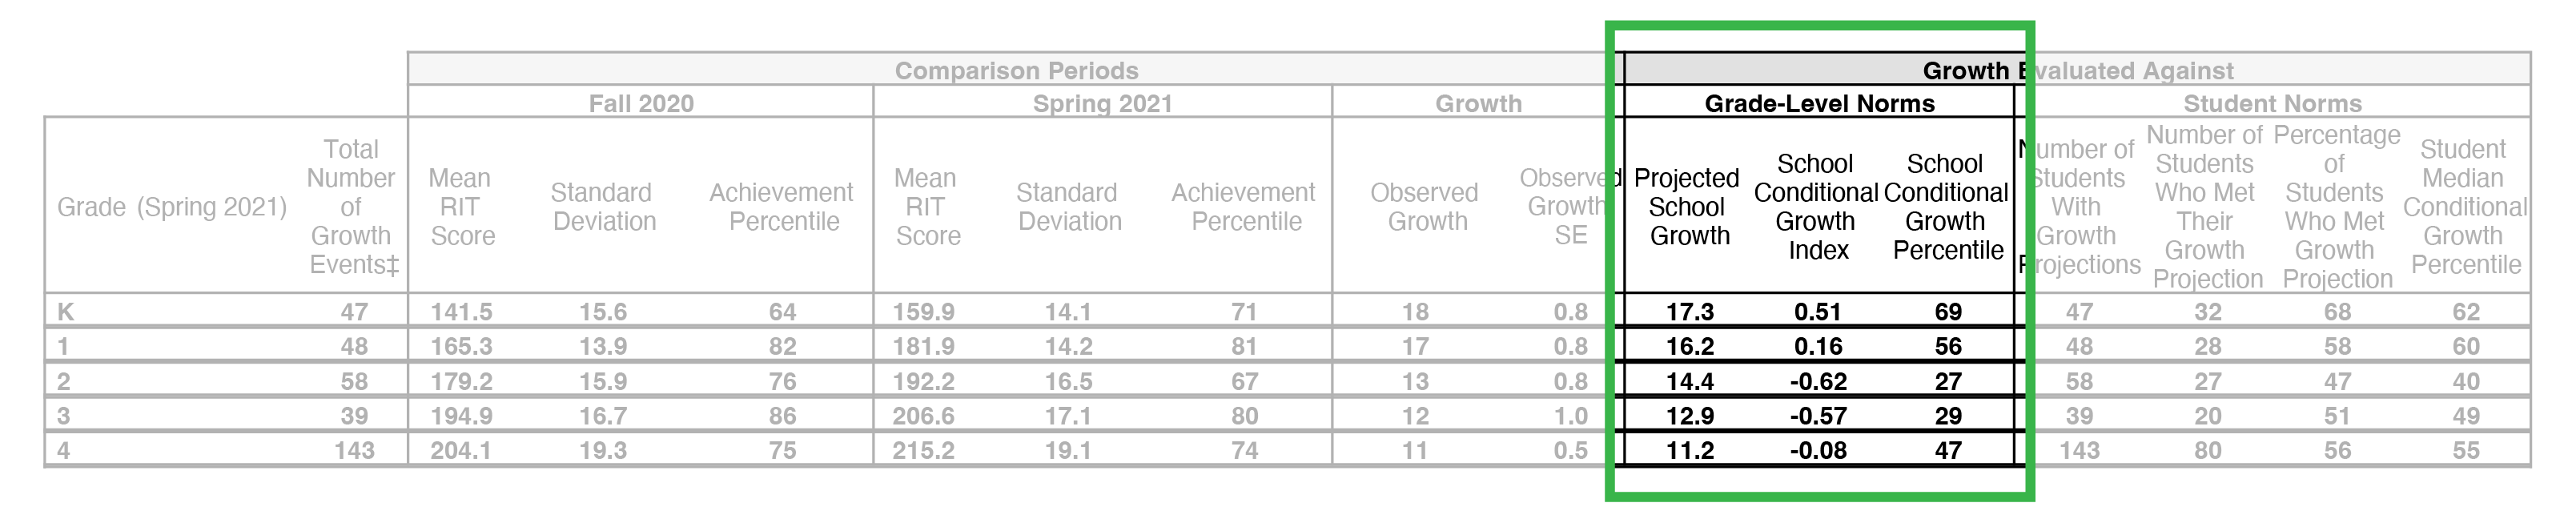 xample screenshot of the Grade-Level Norms section of the Student Growth Summary report.